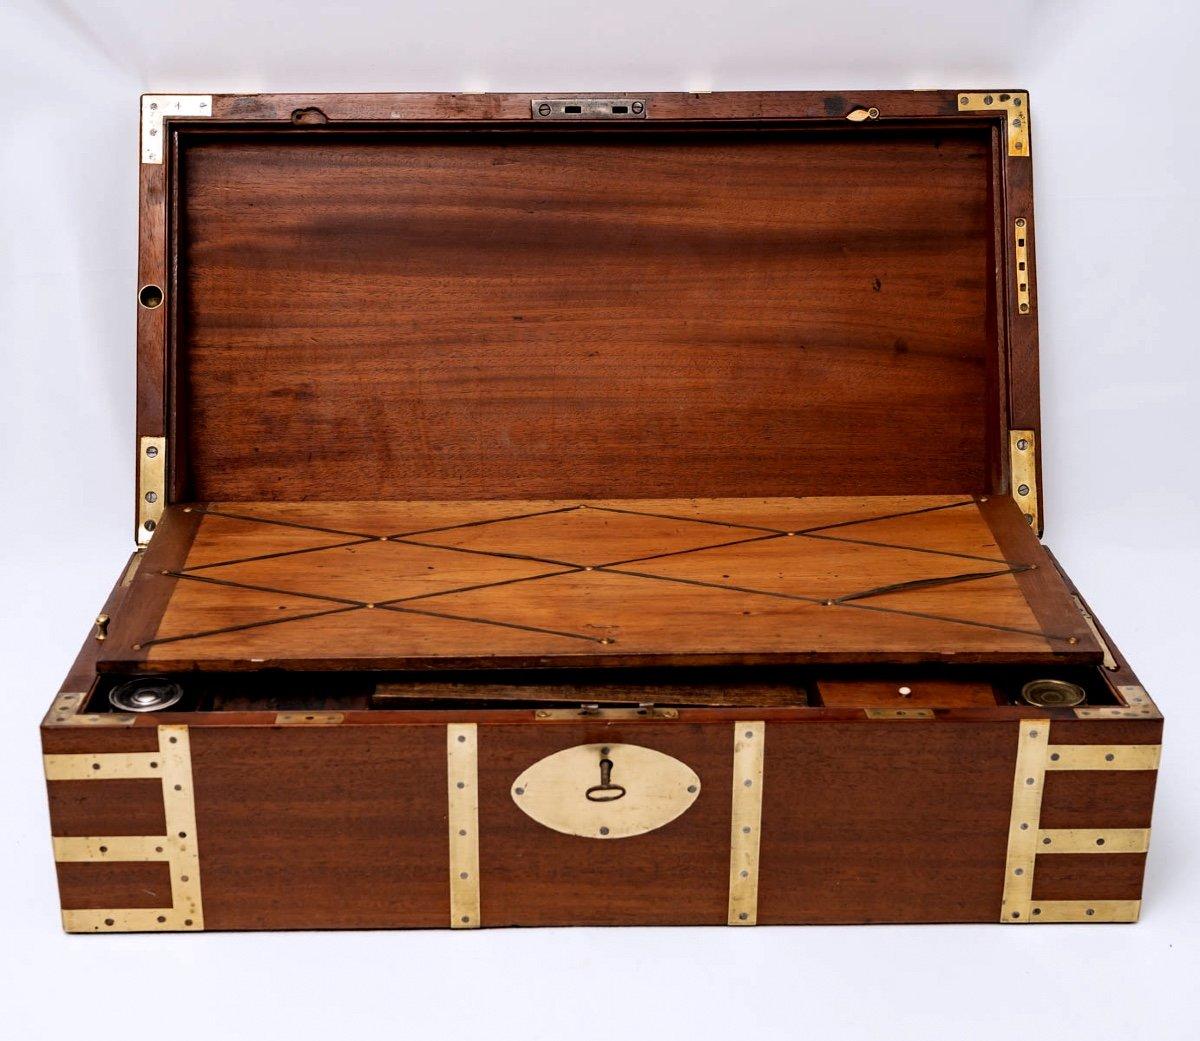 Large solid mahogany marine case decorated with brass reinforcements and blank cartouche.
This magnificent work is English in the taste of the productions of Martin Guillaume Biennais, the goldsmith of Napoleon I (1764-1843) and the two empresses.